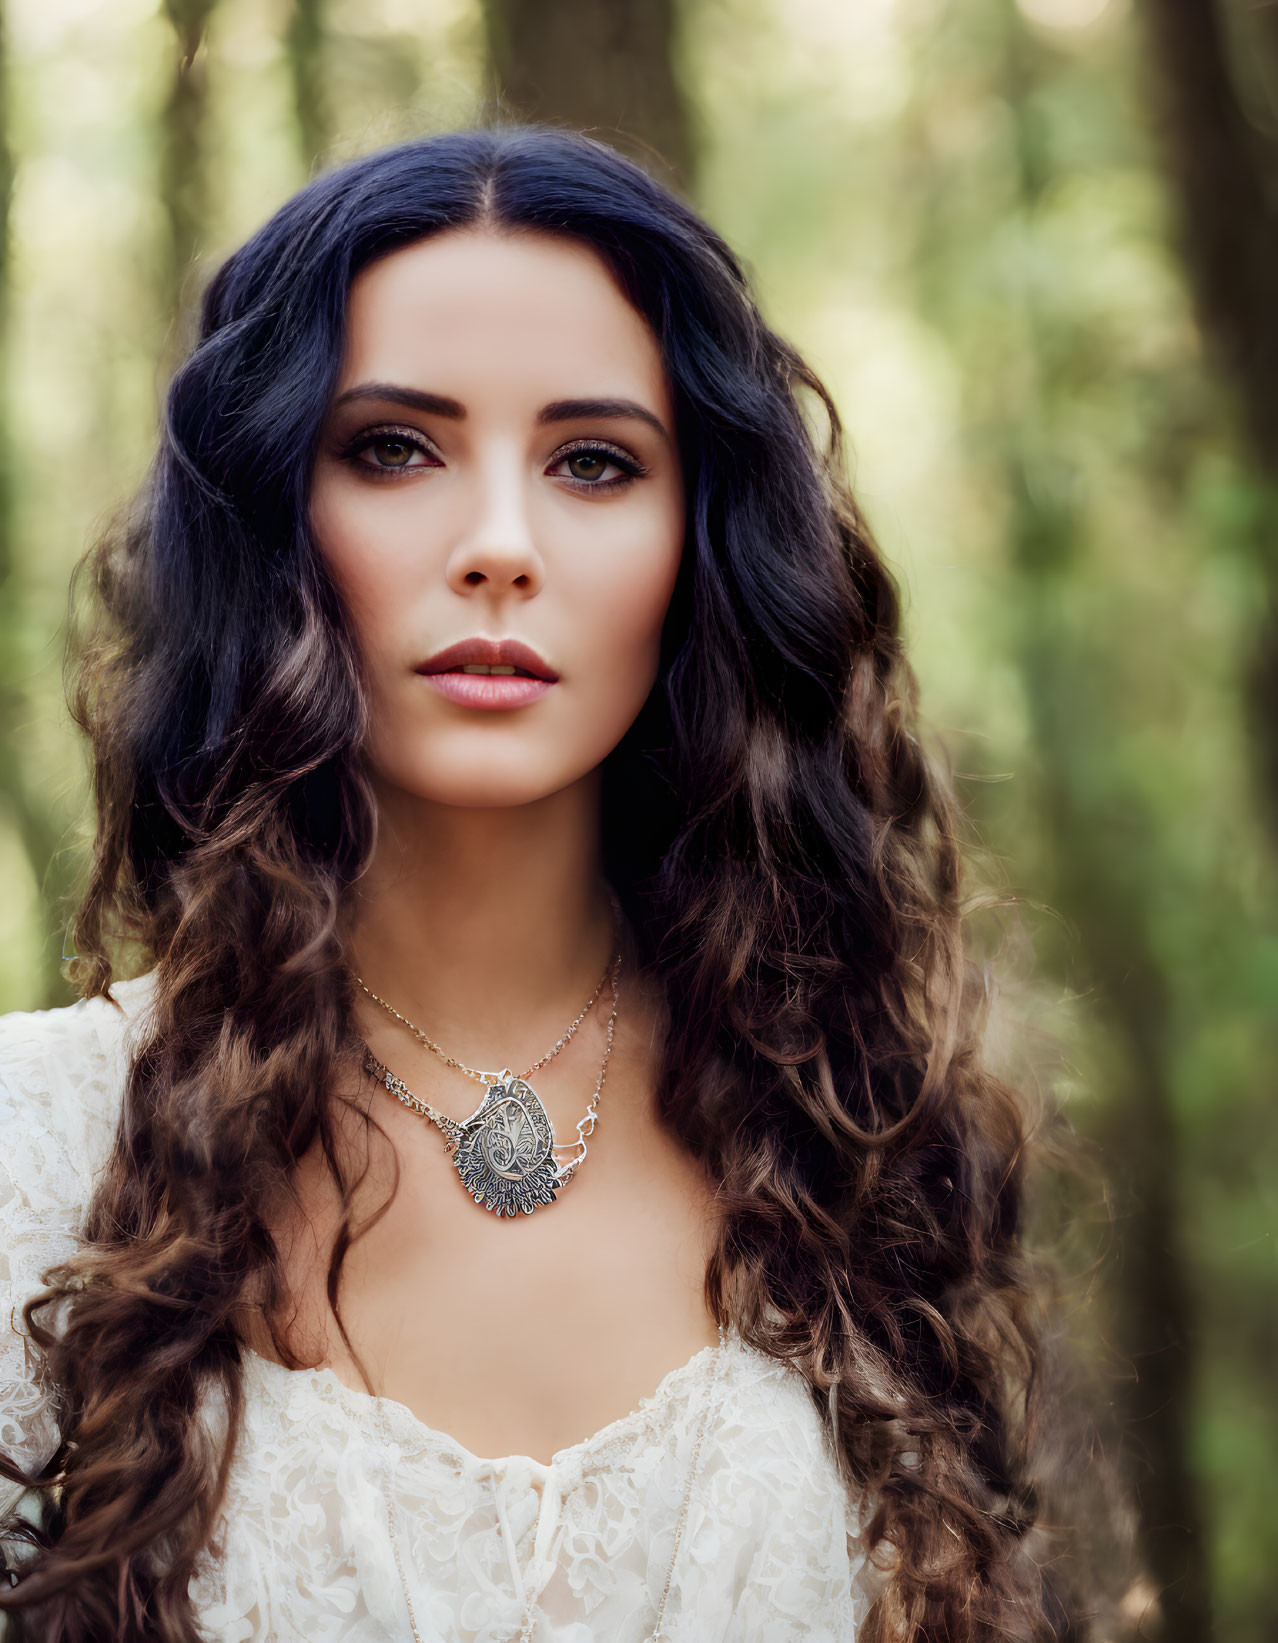 Woman with long wavy hair in lace top and pendant necklace against forest backdrop